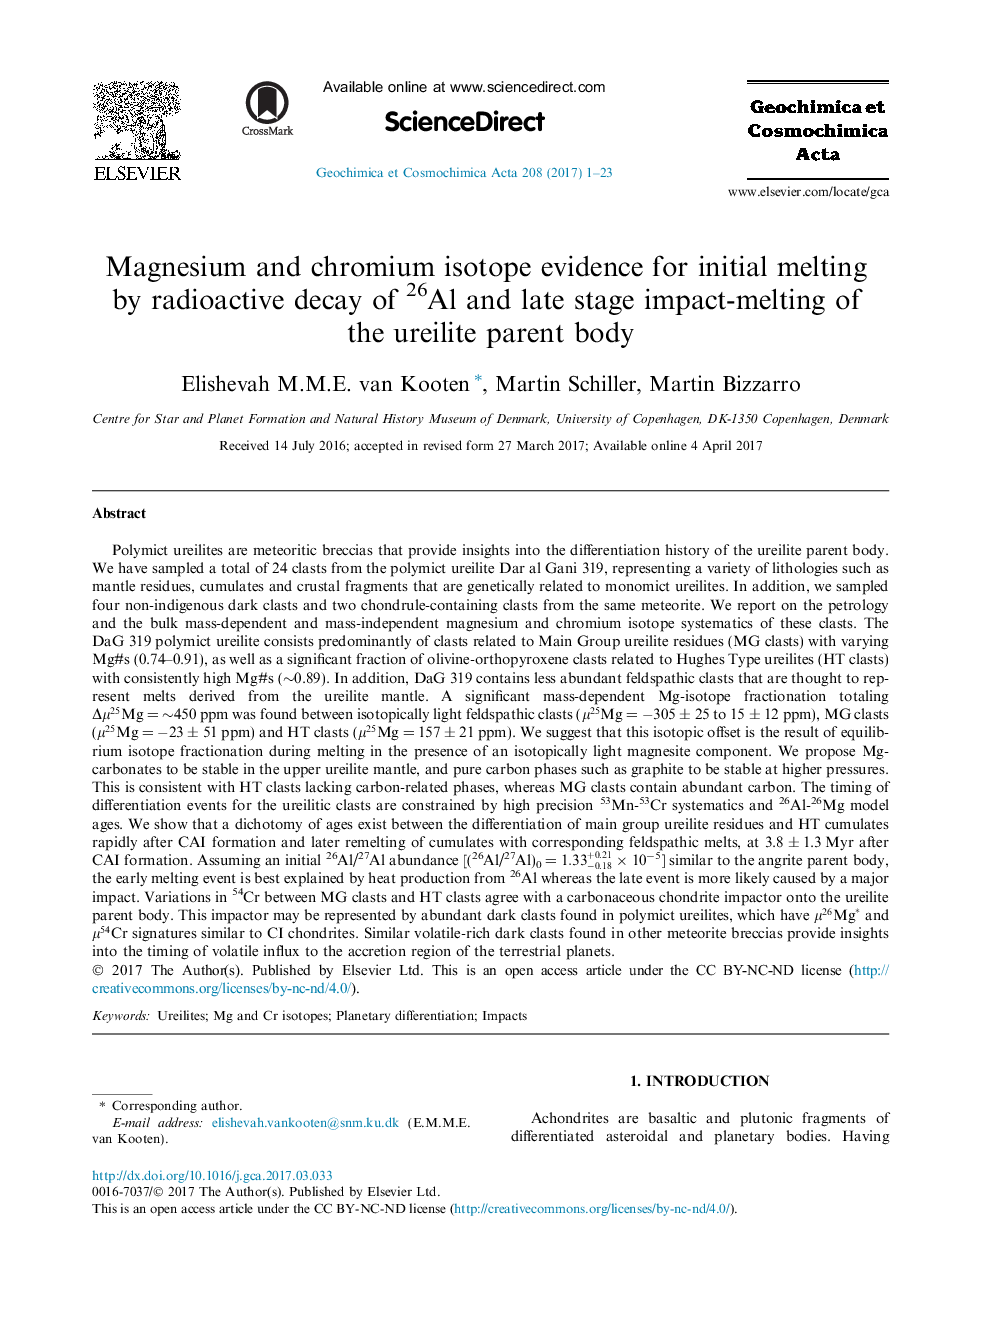 Magnesium and chromium isotope evidence for initial melting by radioactive decay of 26Al and late stage impact-melting of the ureilite parent body